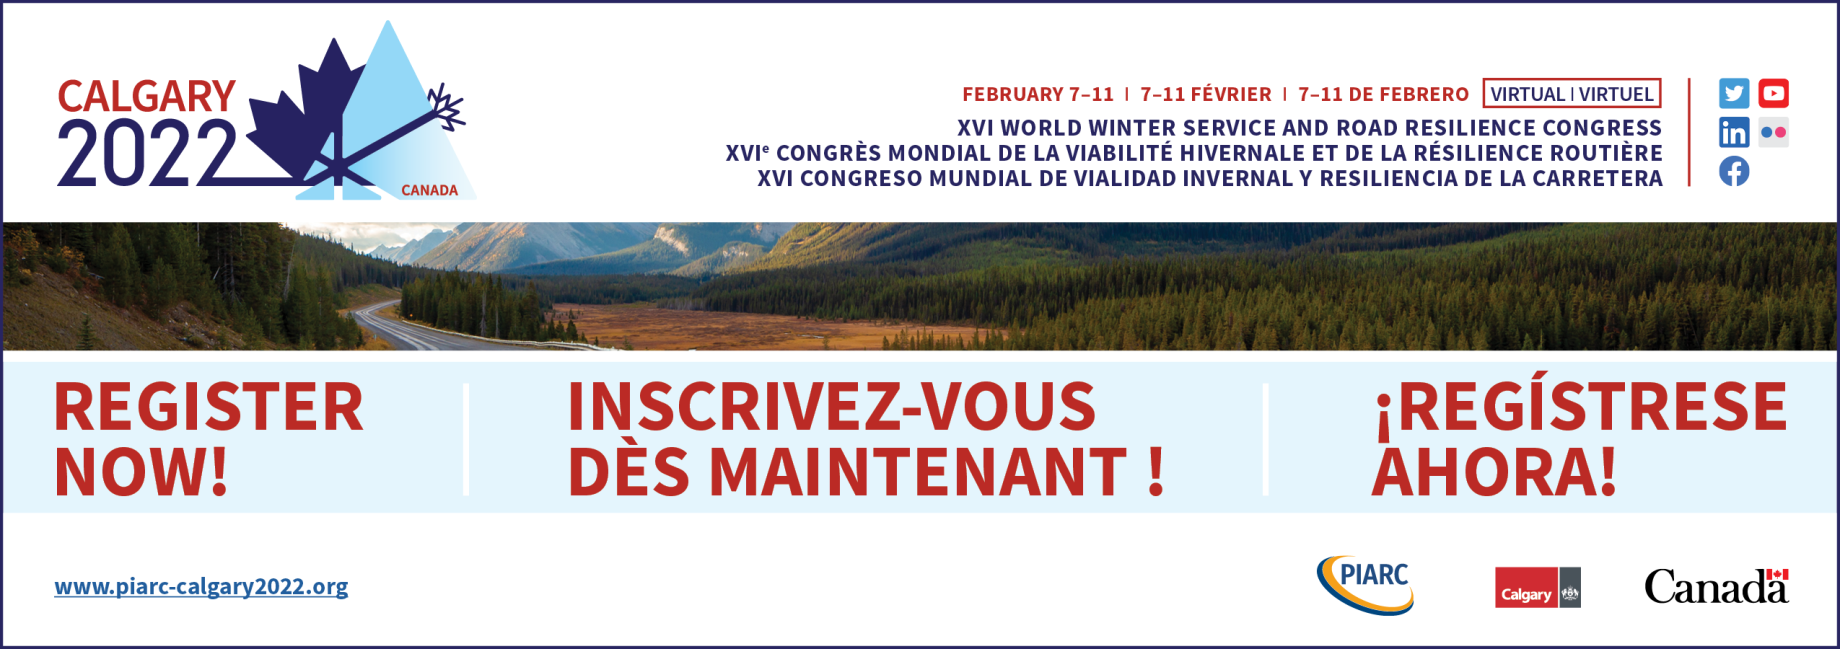 Registration is now open! Book now
and attend virtually the XVI World Winter Service and Road Resilience Congress